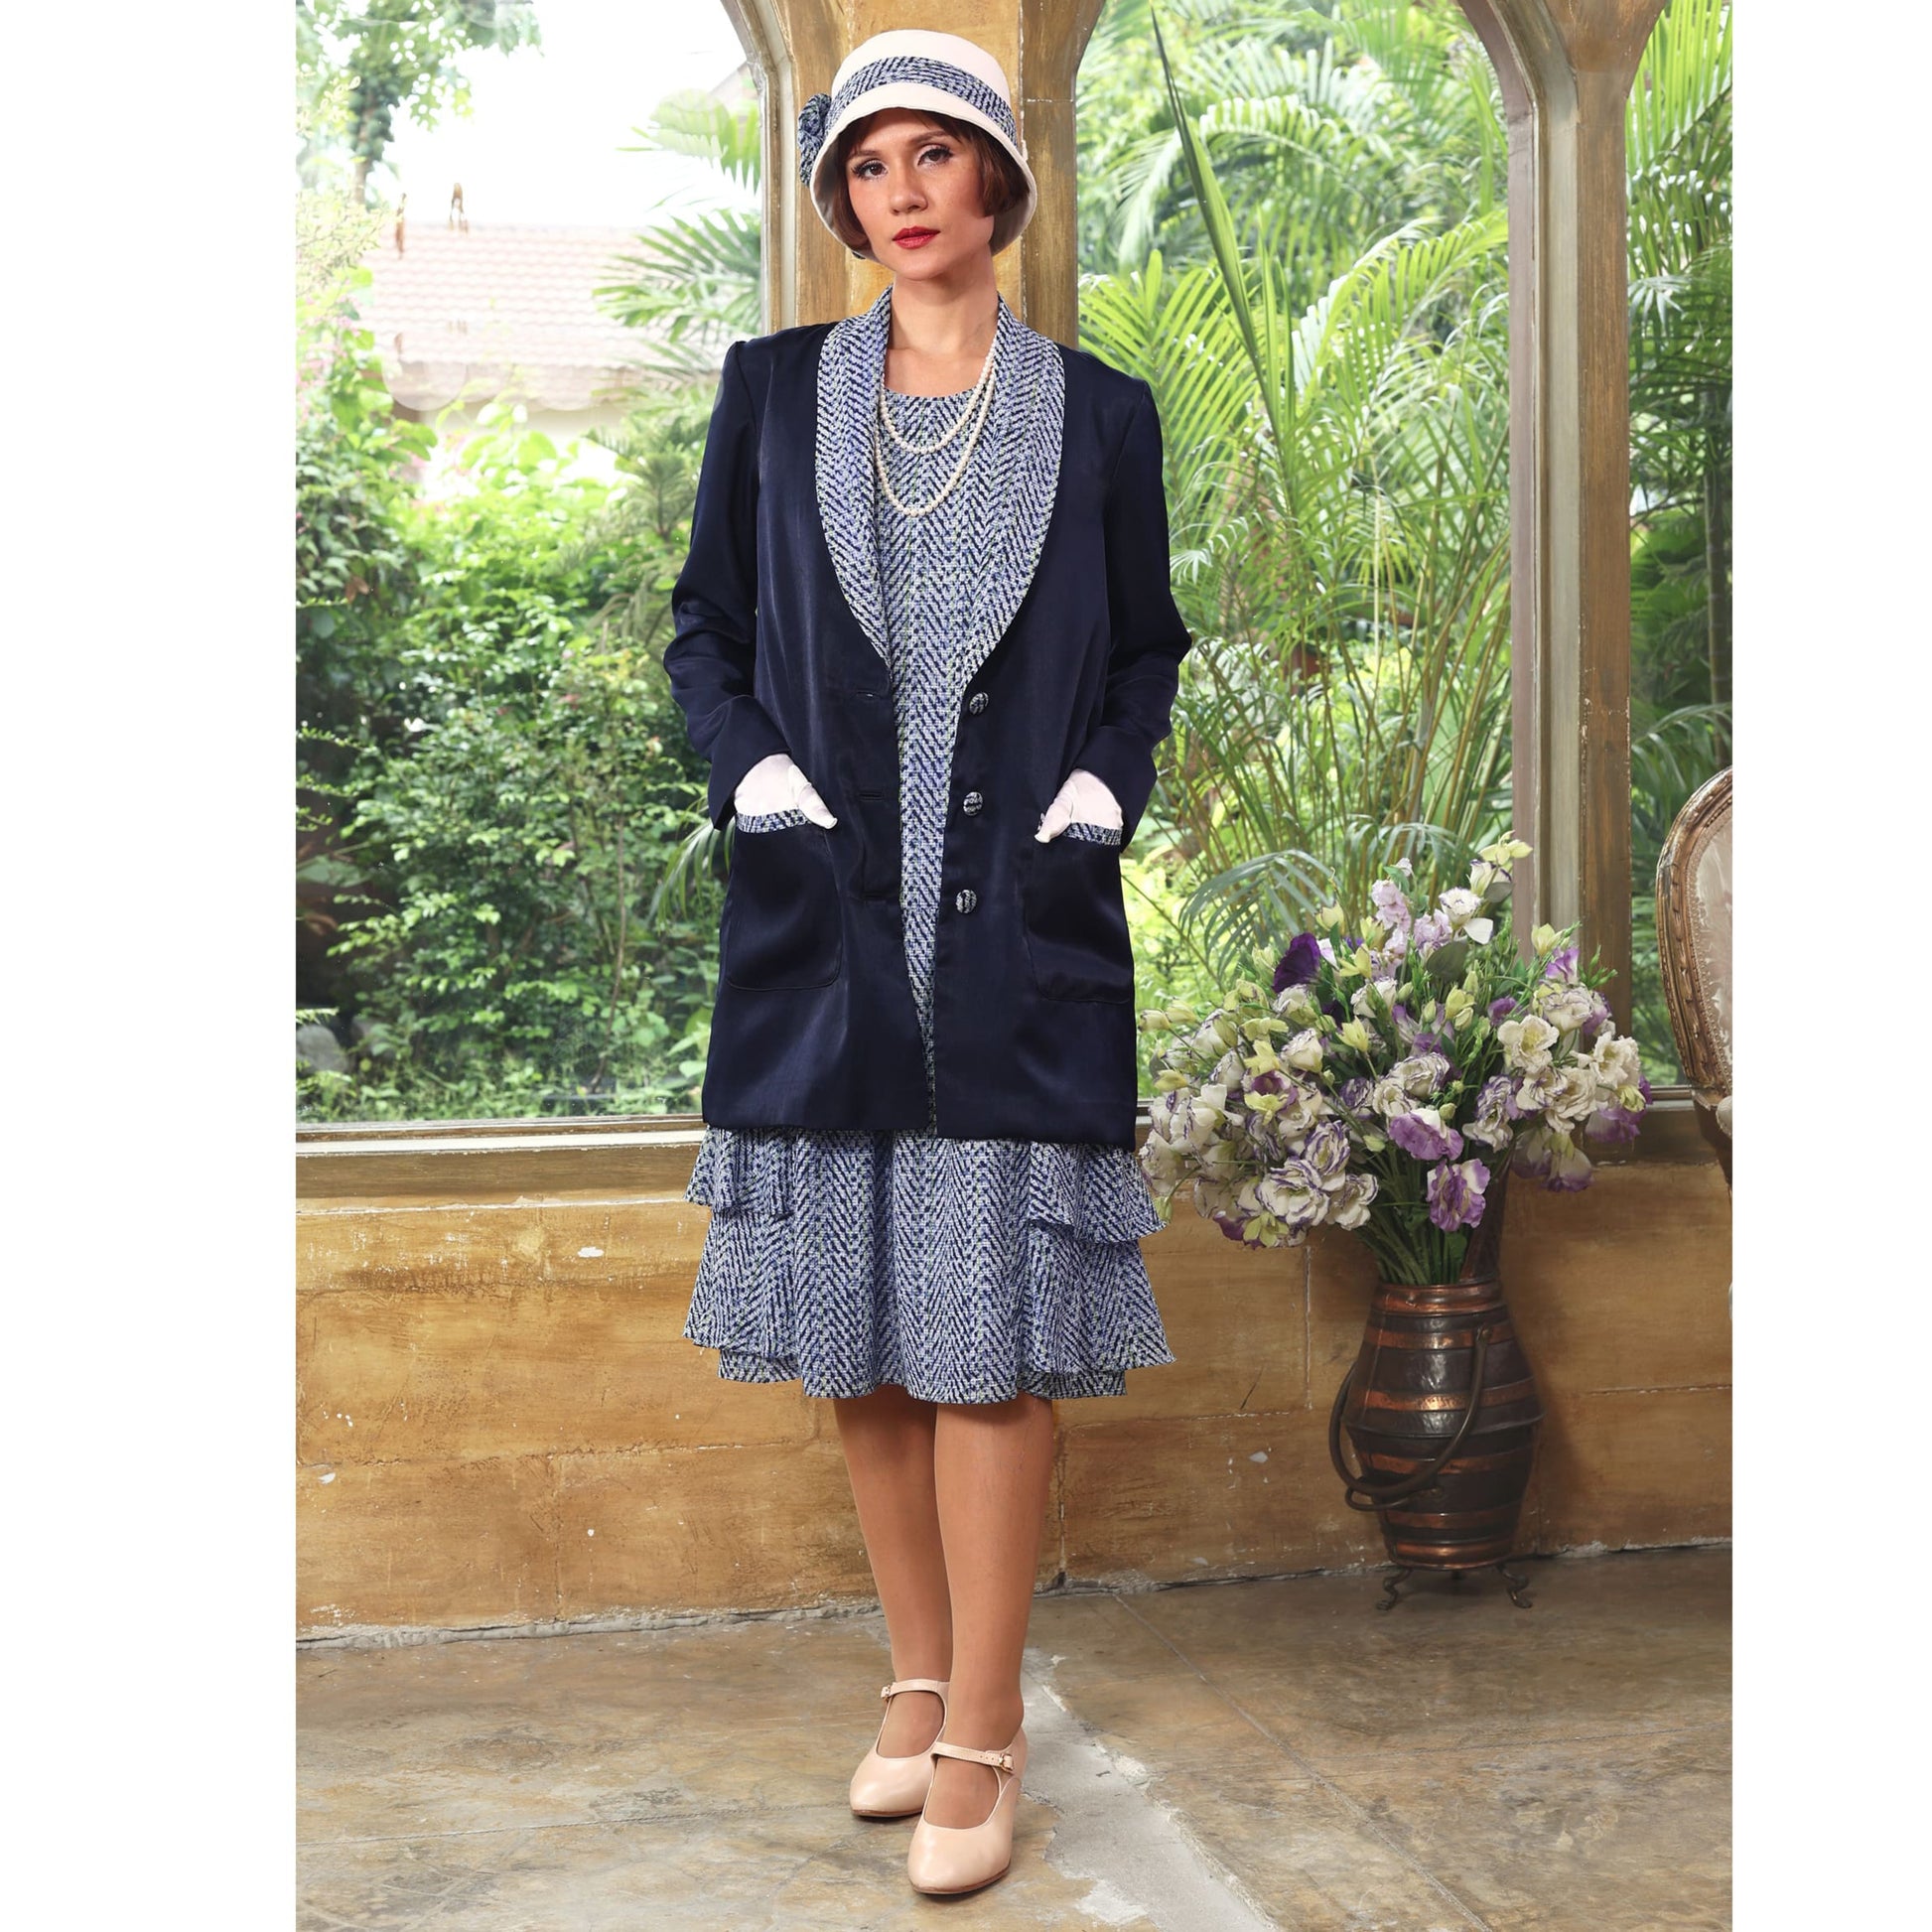 Navy blue Gatsby jacket - or 2-piece ensemble with matching dress - a vintage-inspired Roaring Twenties jacket/dress